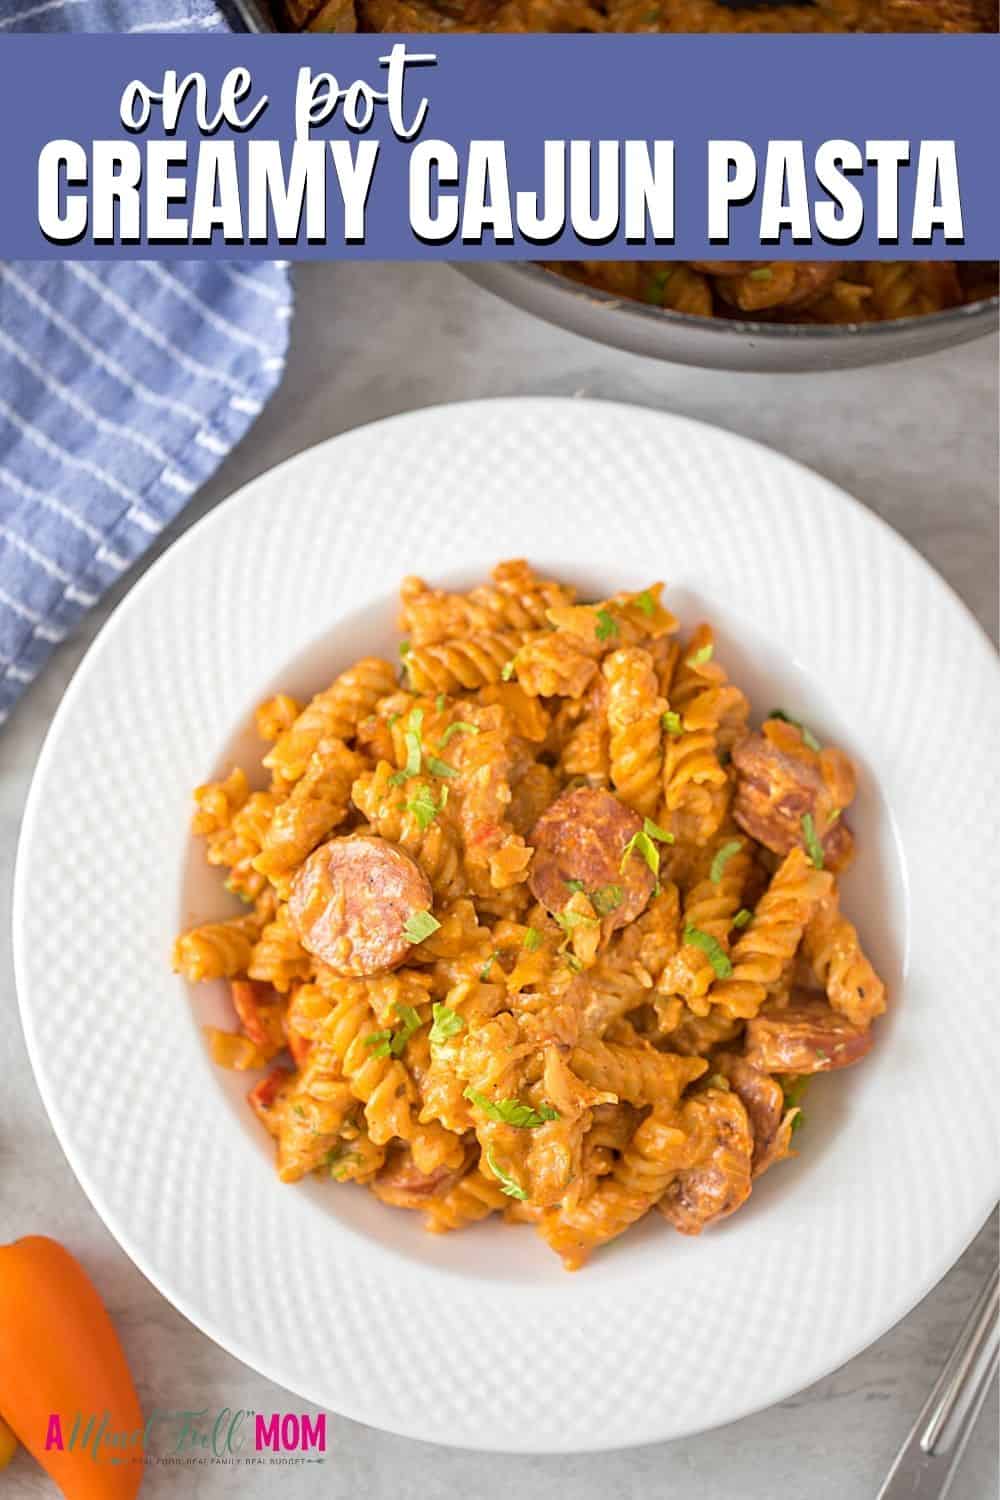 Creamy Cajun Pasta is a a one pot meal made with spicy andouille sausage, peppers, onions, pasta, and a creamy, slightly spicy sauce. Ready in less than 30 minutes and in one pan, this is a perfect weeknight meal. 